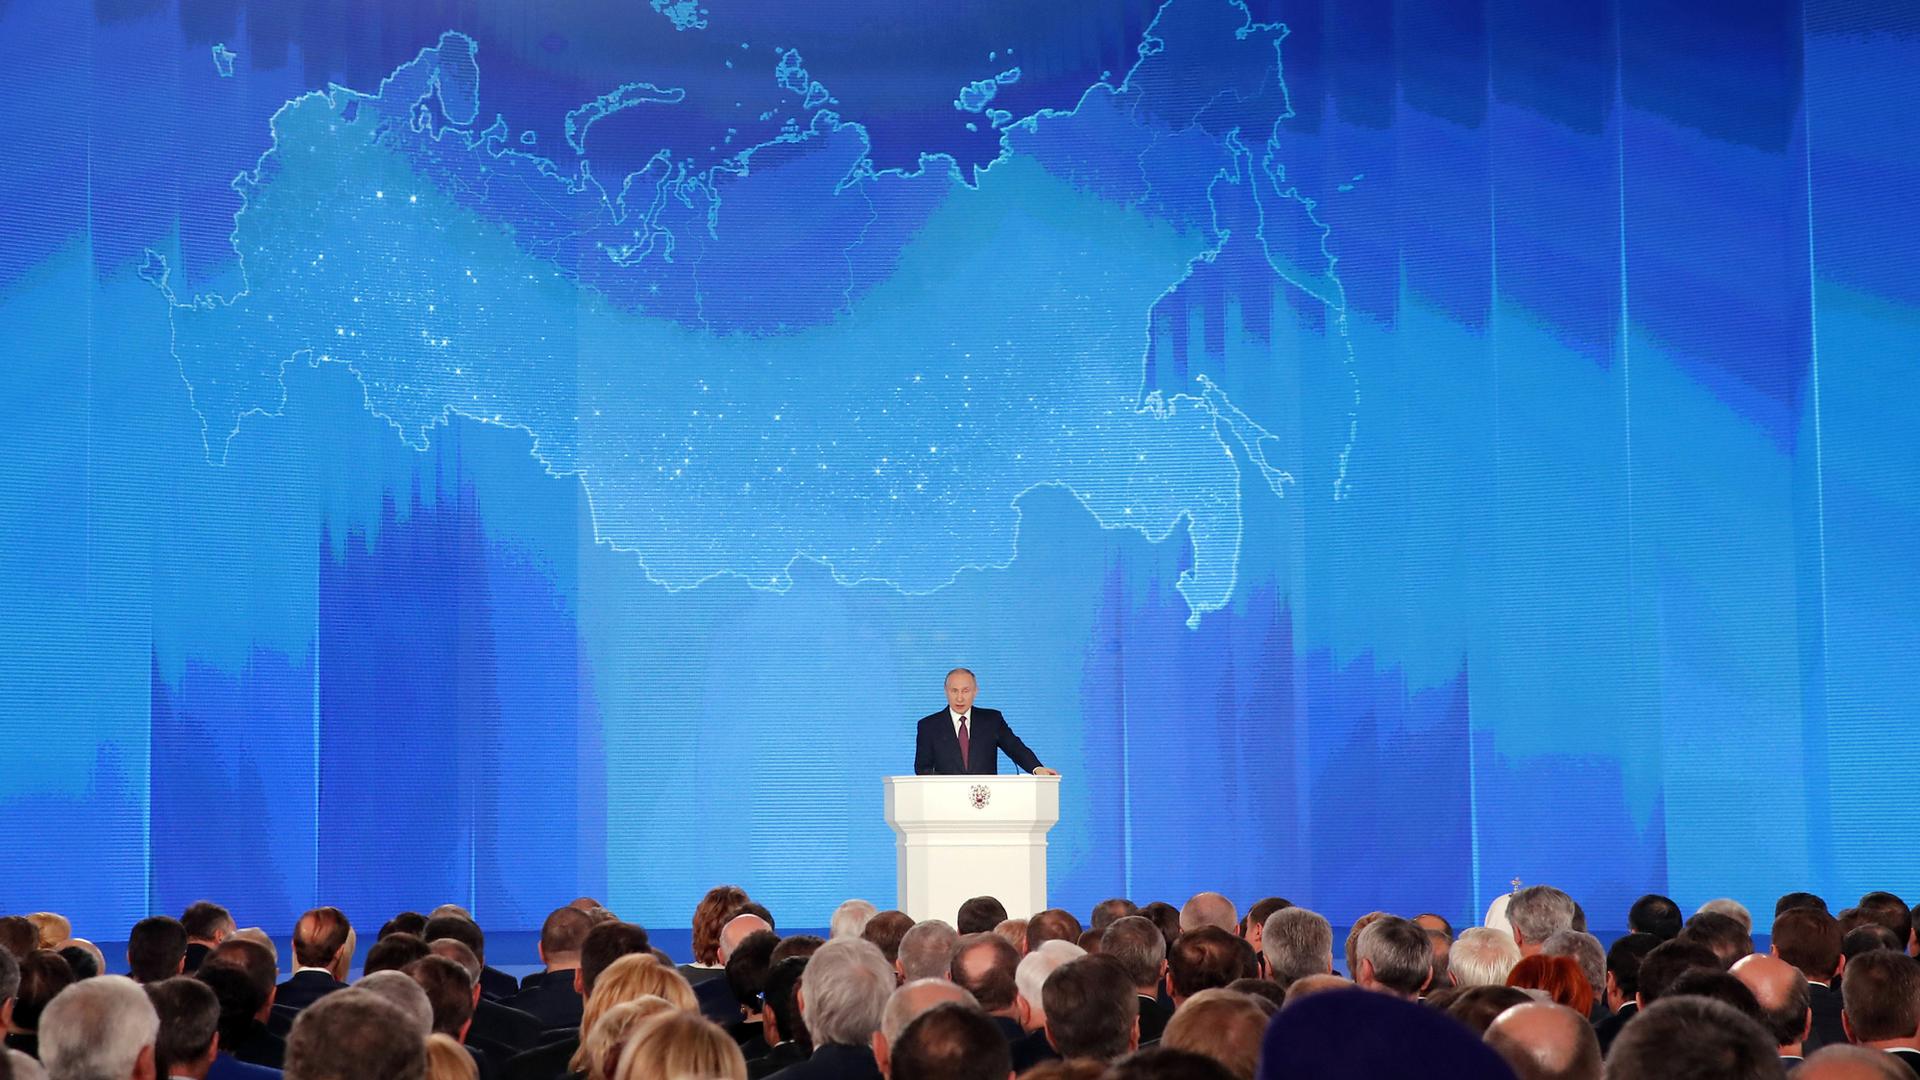 Russian President Vladimir Putin addresses the Federal Assembly in Moscow, standing at a podium in front of a large blue map of Russia.